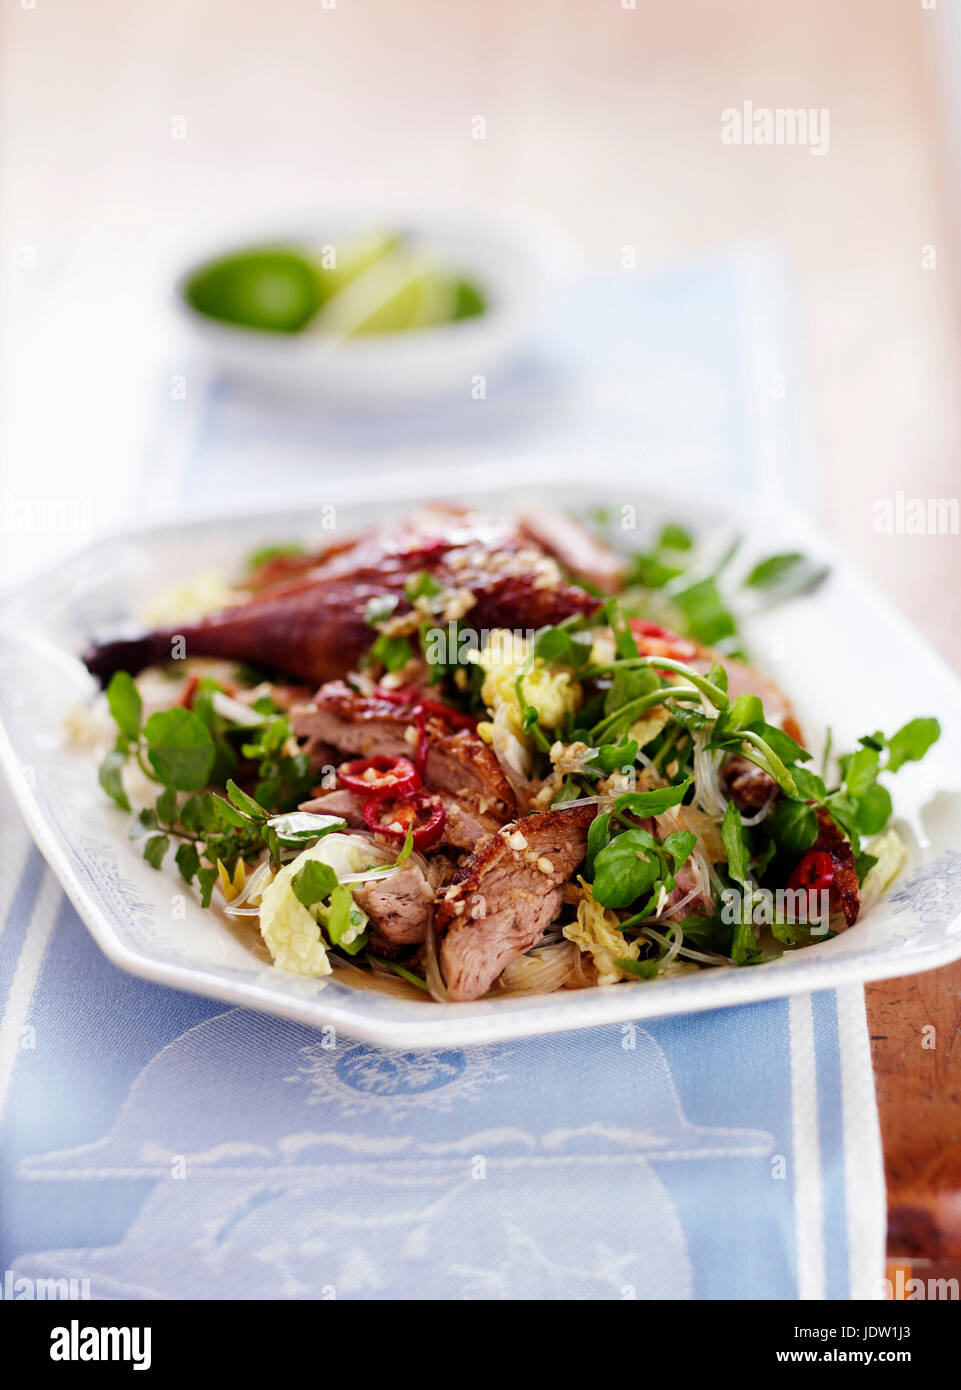 Plate of meat and salad Stock Photo